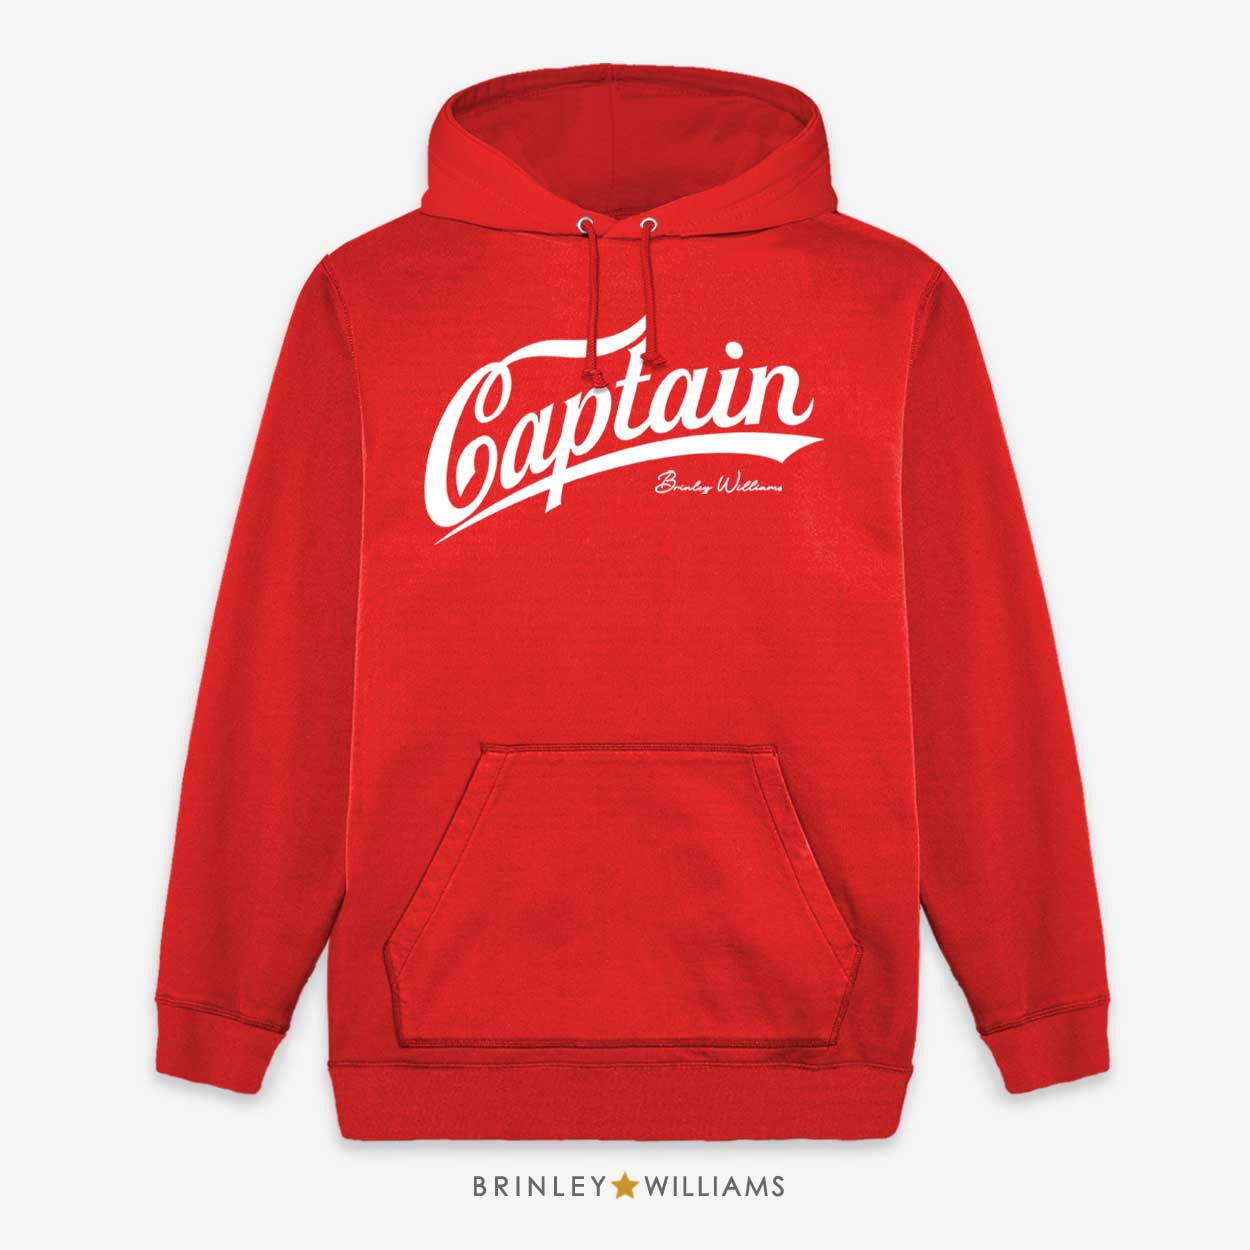 Captain Unisex Hoodie - Fire Red